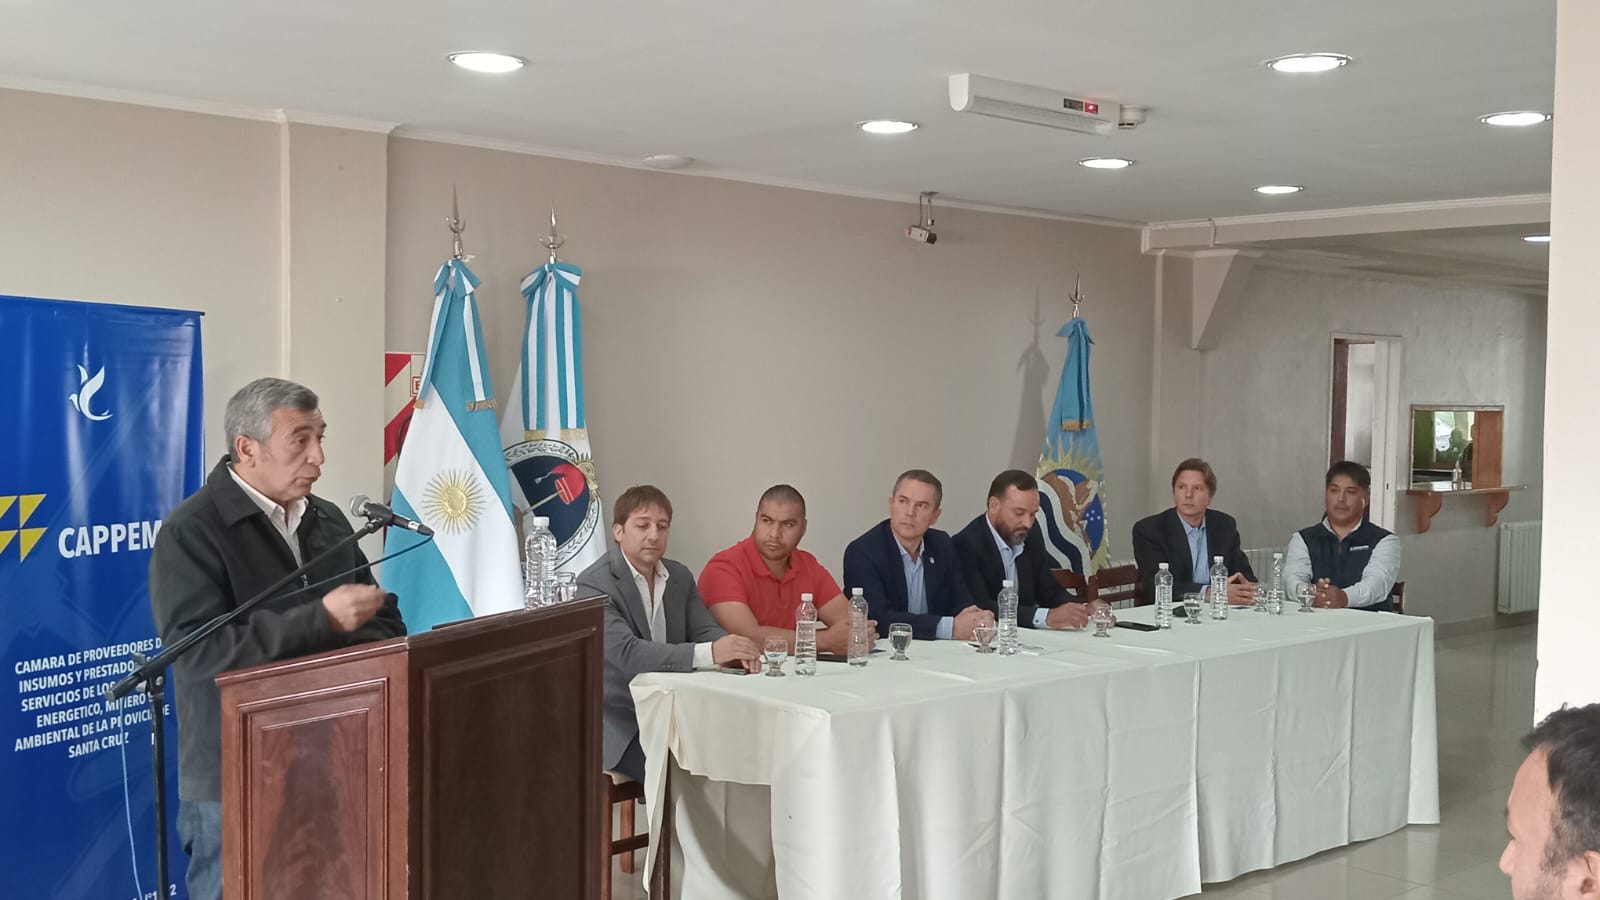 A new suppliers chamber was founded in the province of Santa Cruz